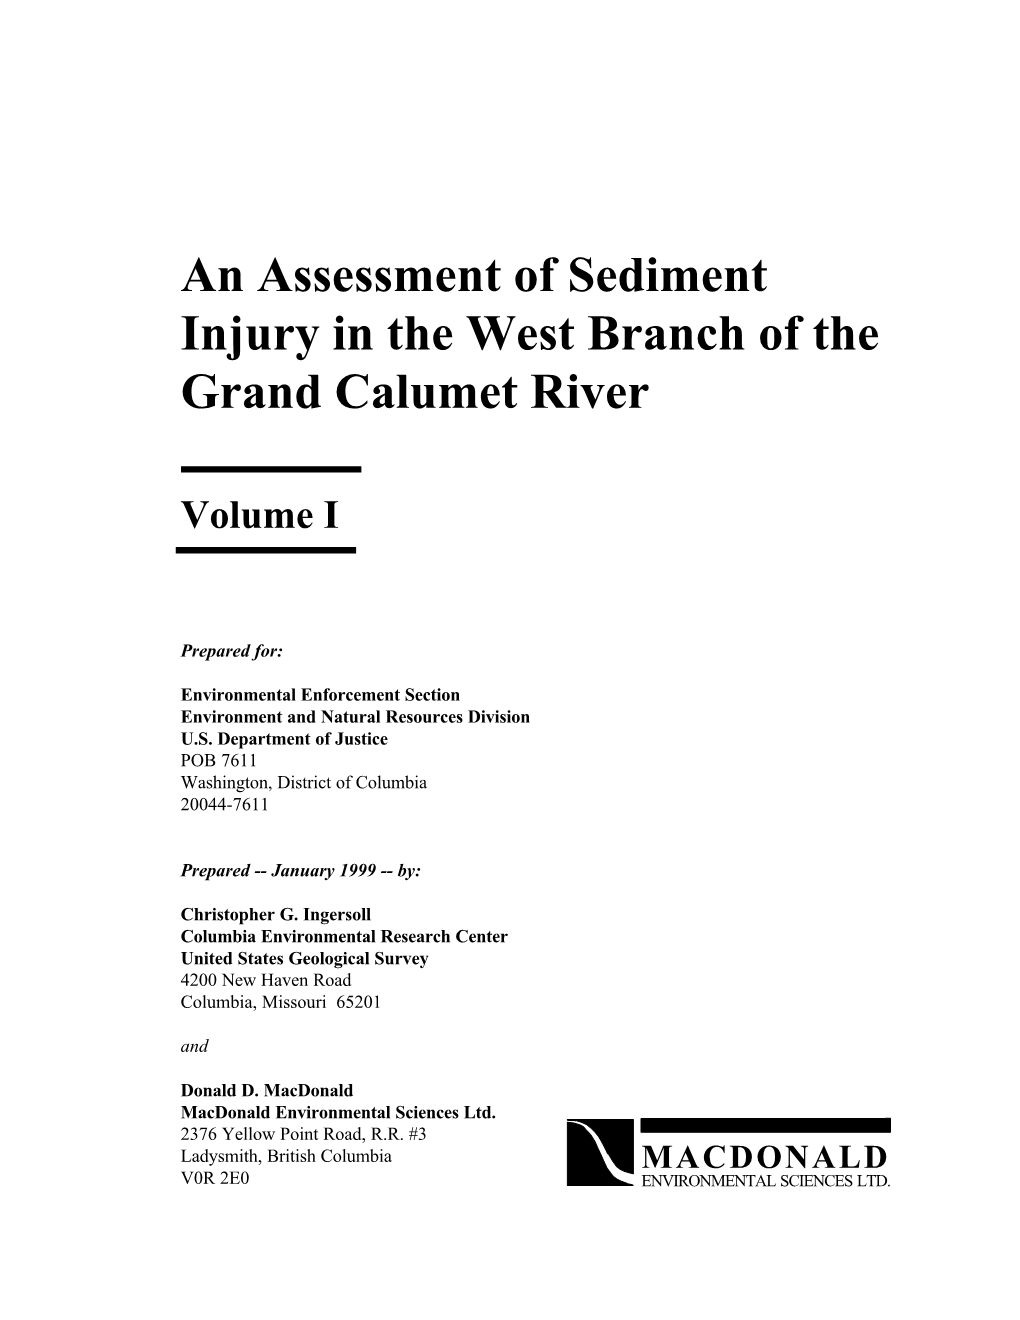 An Assessment of Sediment Injury in the West Branch of the Grand Calumet River